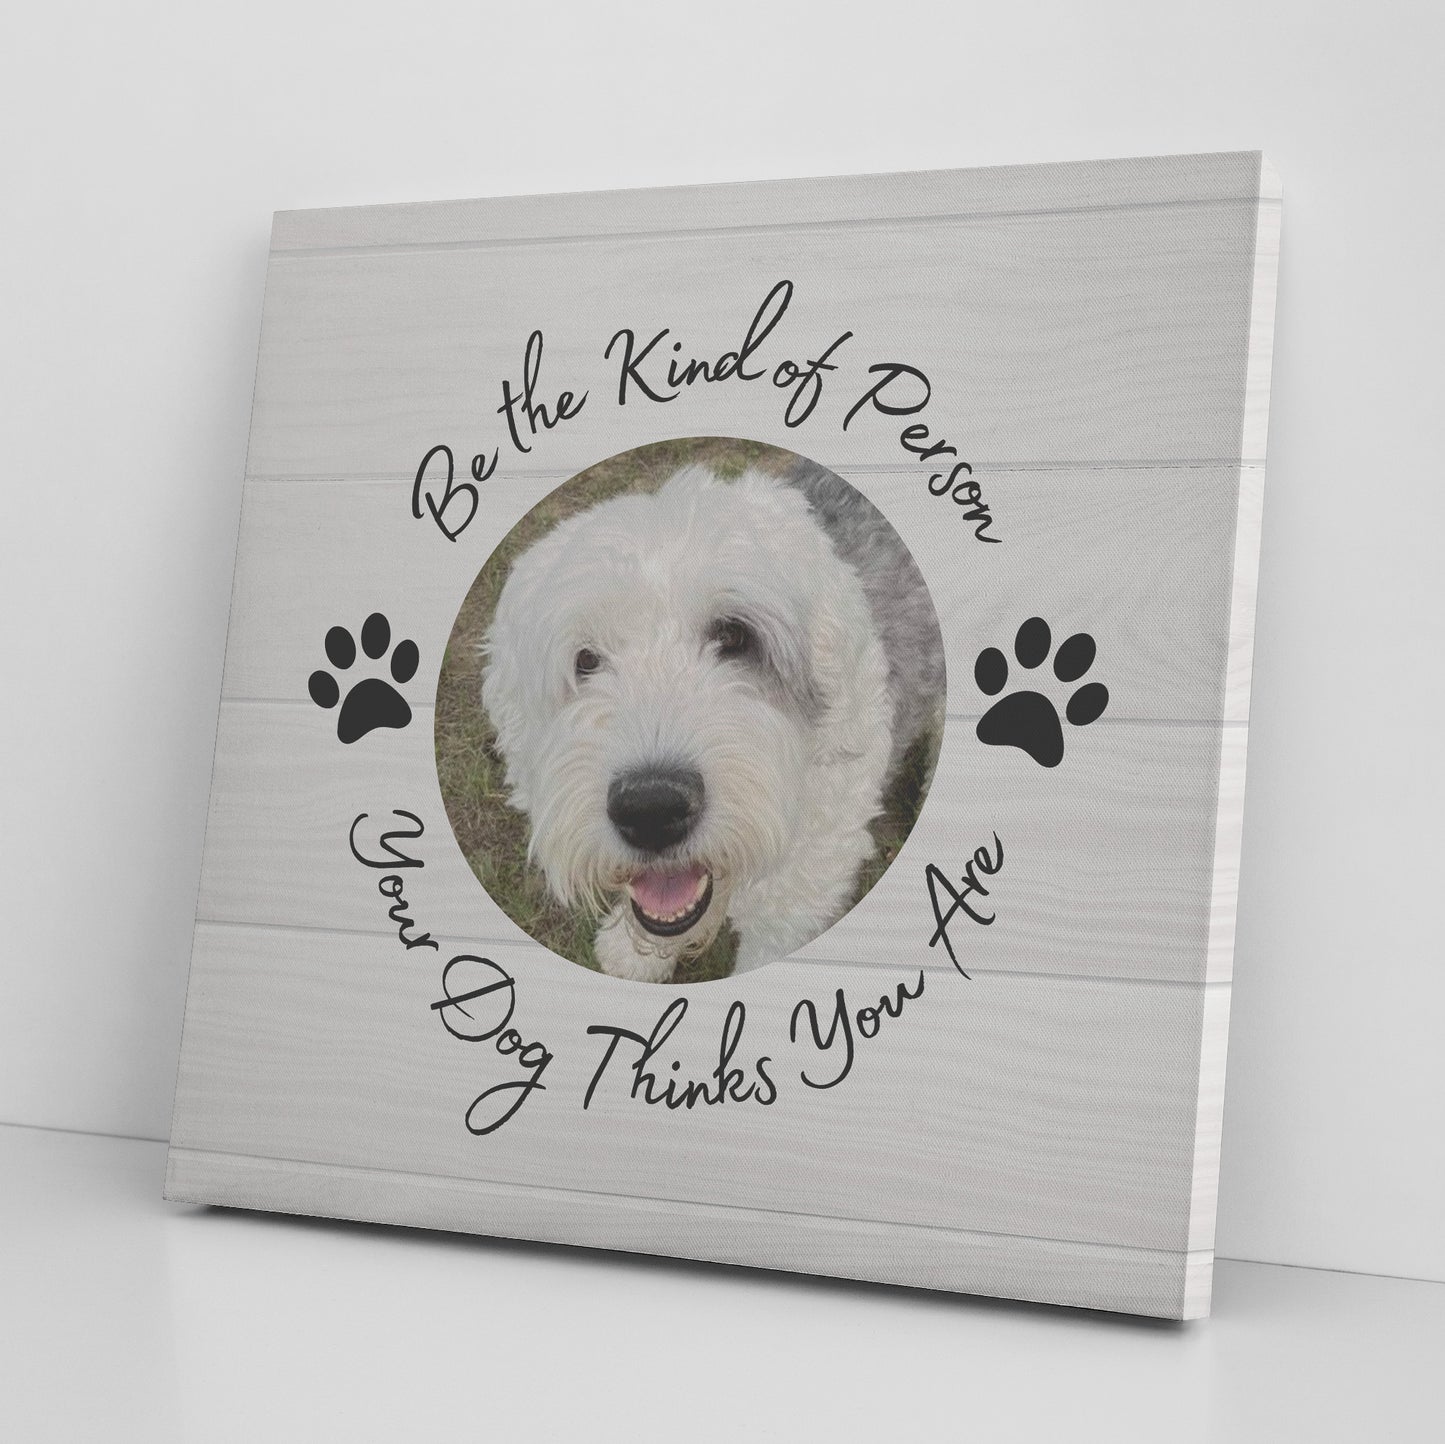 Personalized "Be the Kind of Person Your Dog Thinks You Are" Canvas Wall Art